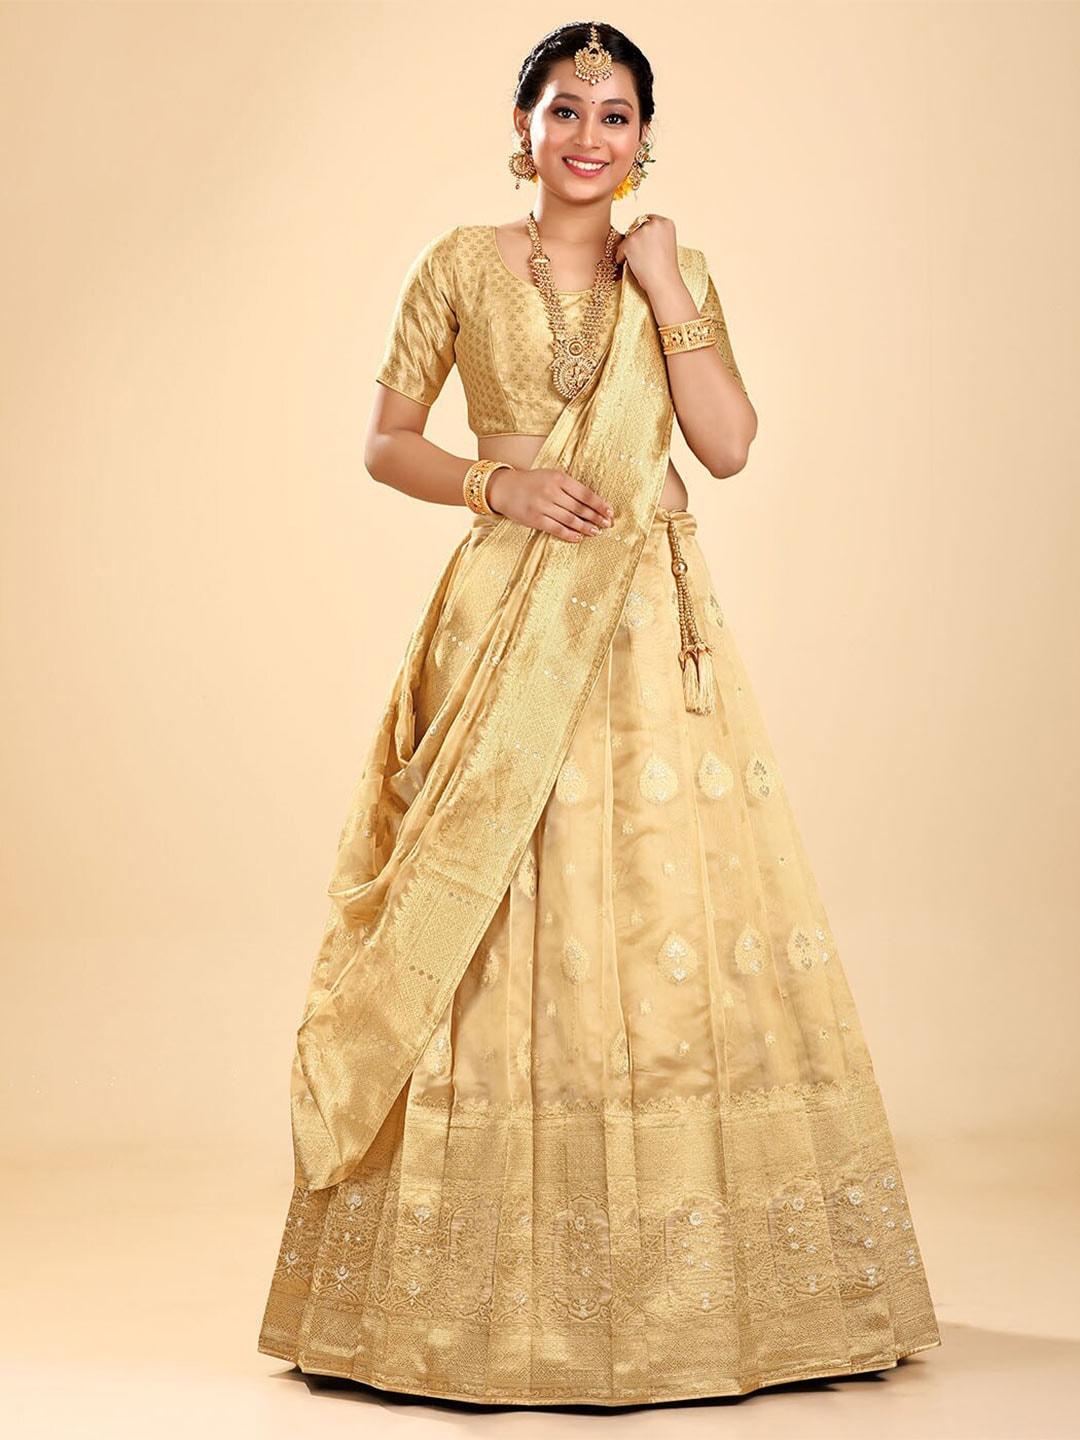 HALFSAREE STUDIO Cream-Coloured & Gold-Toned Embroidered Semi-Stitched Lehenga & Unstitched Blouse With